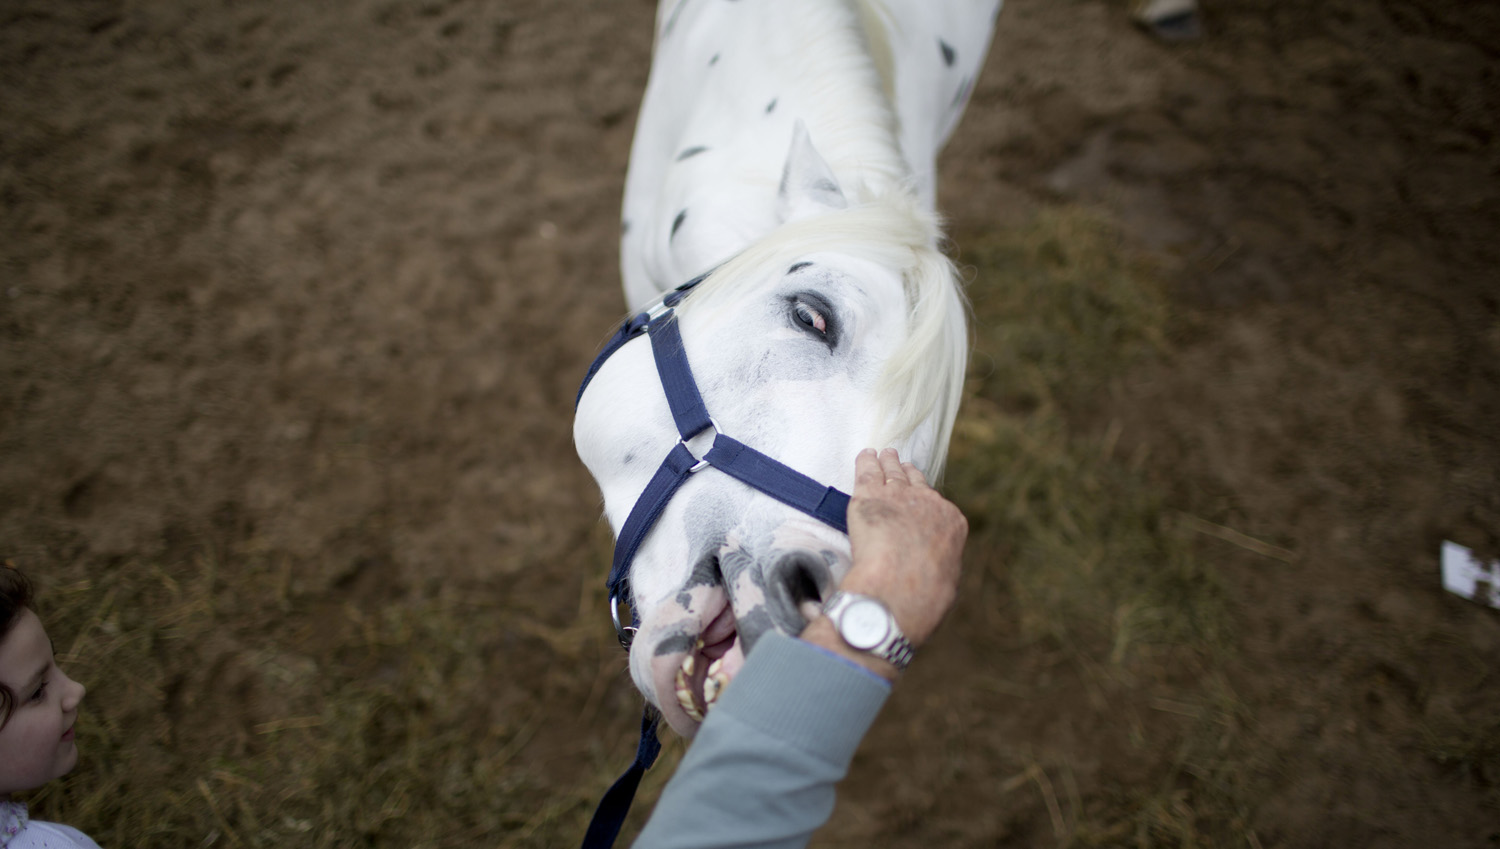 A visitor pets a horse during the Rural Society's annual exposition in Buenos Aires on July 21, 2014.